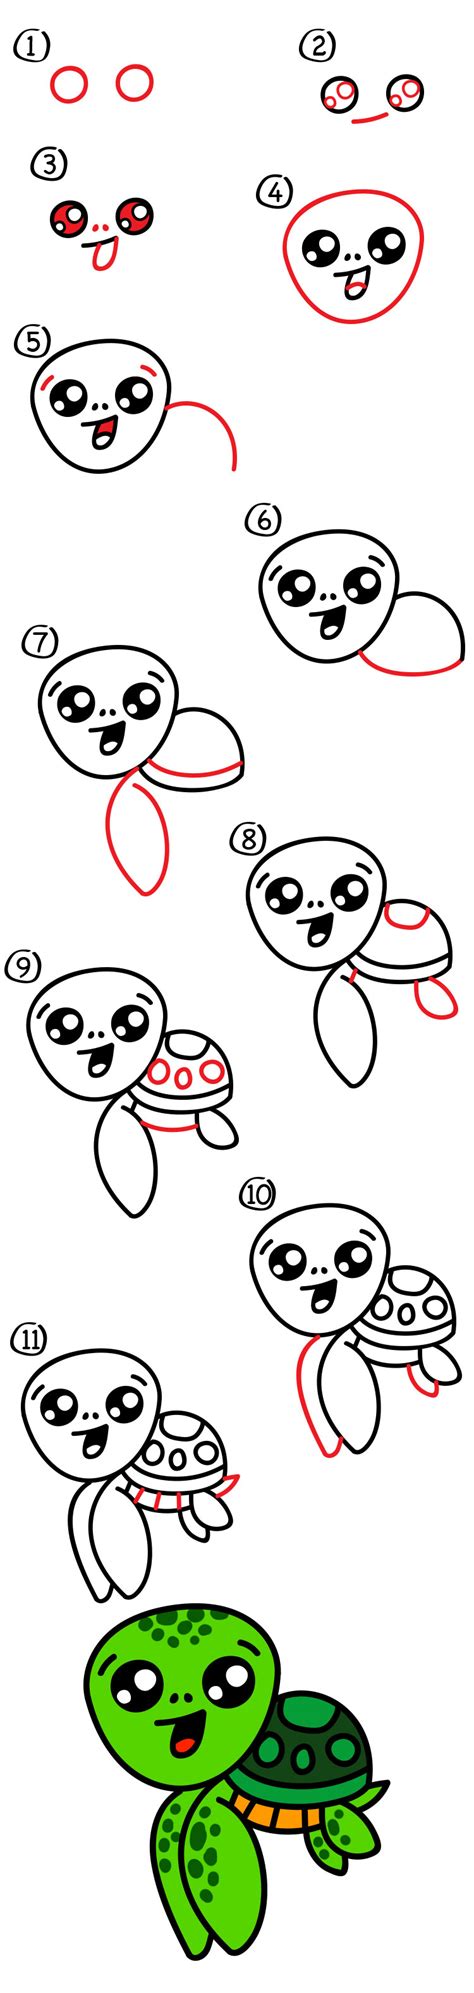 May 22, 2019 · how to draw a cartoon female face step by step step 1. How To Draw A Cartoon Sea Turtle - Art For Kids Hub